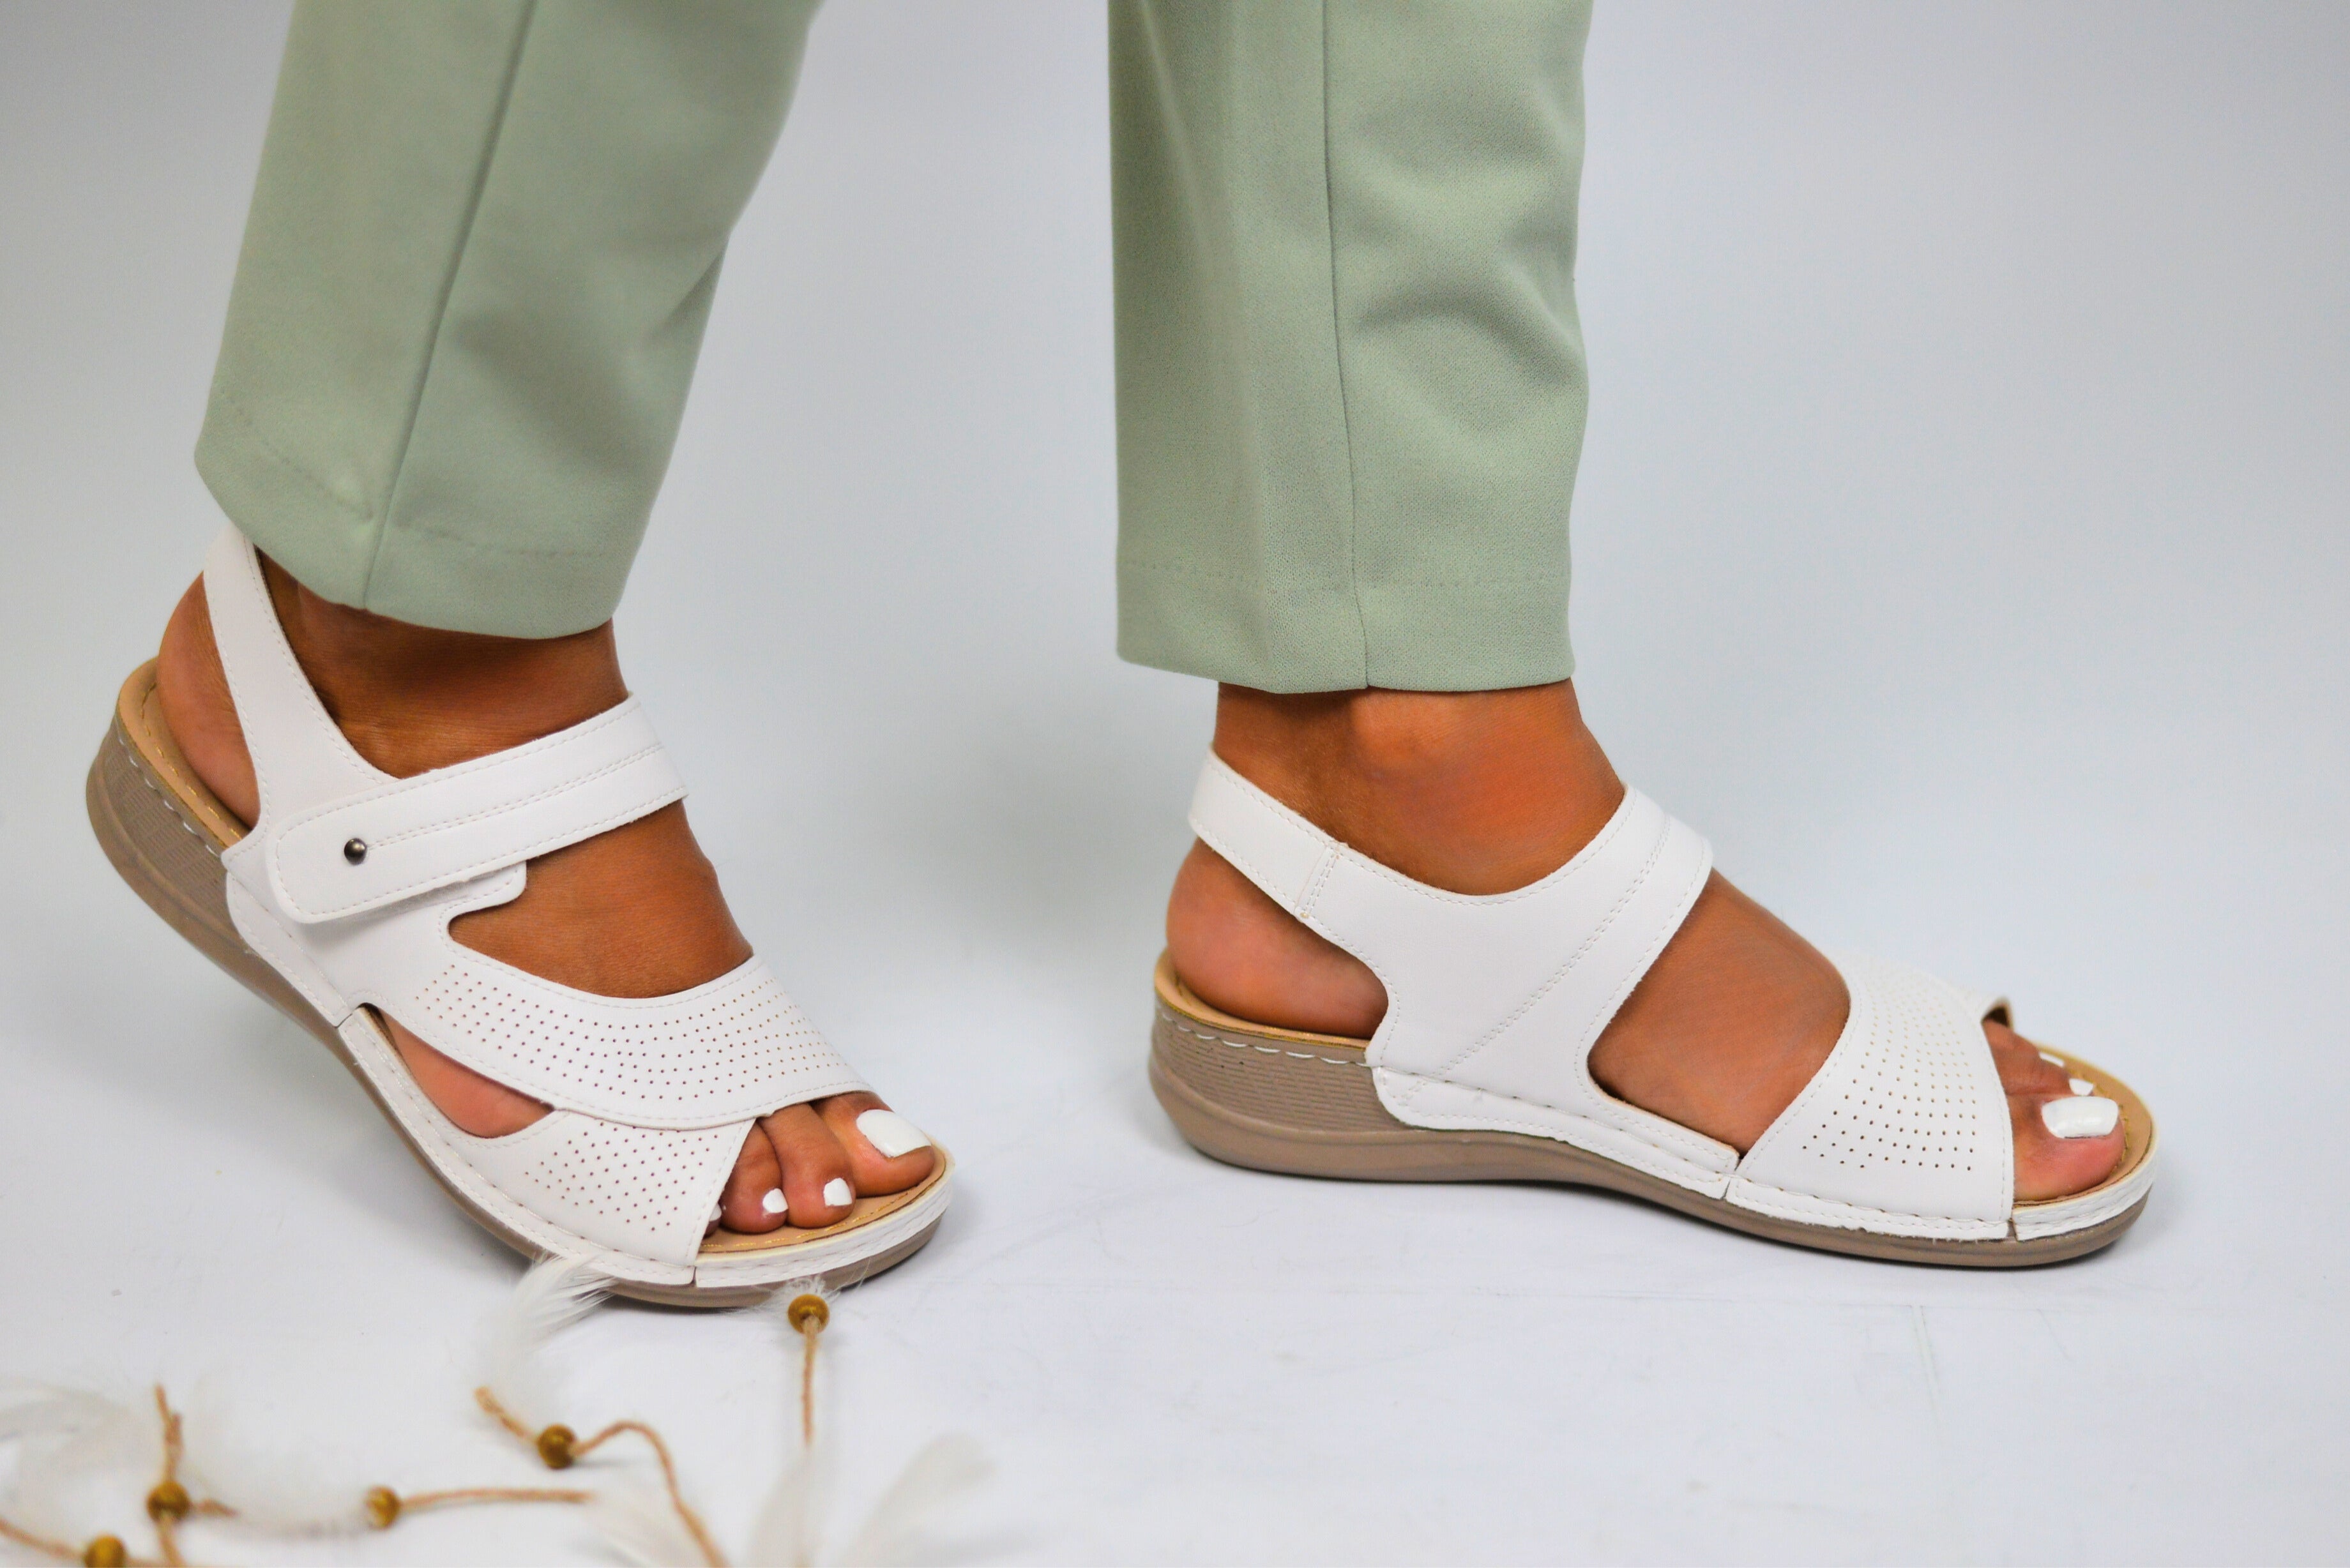 Women's Sandals With Low Sole Ginger White Made Of Ecological Leather